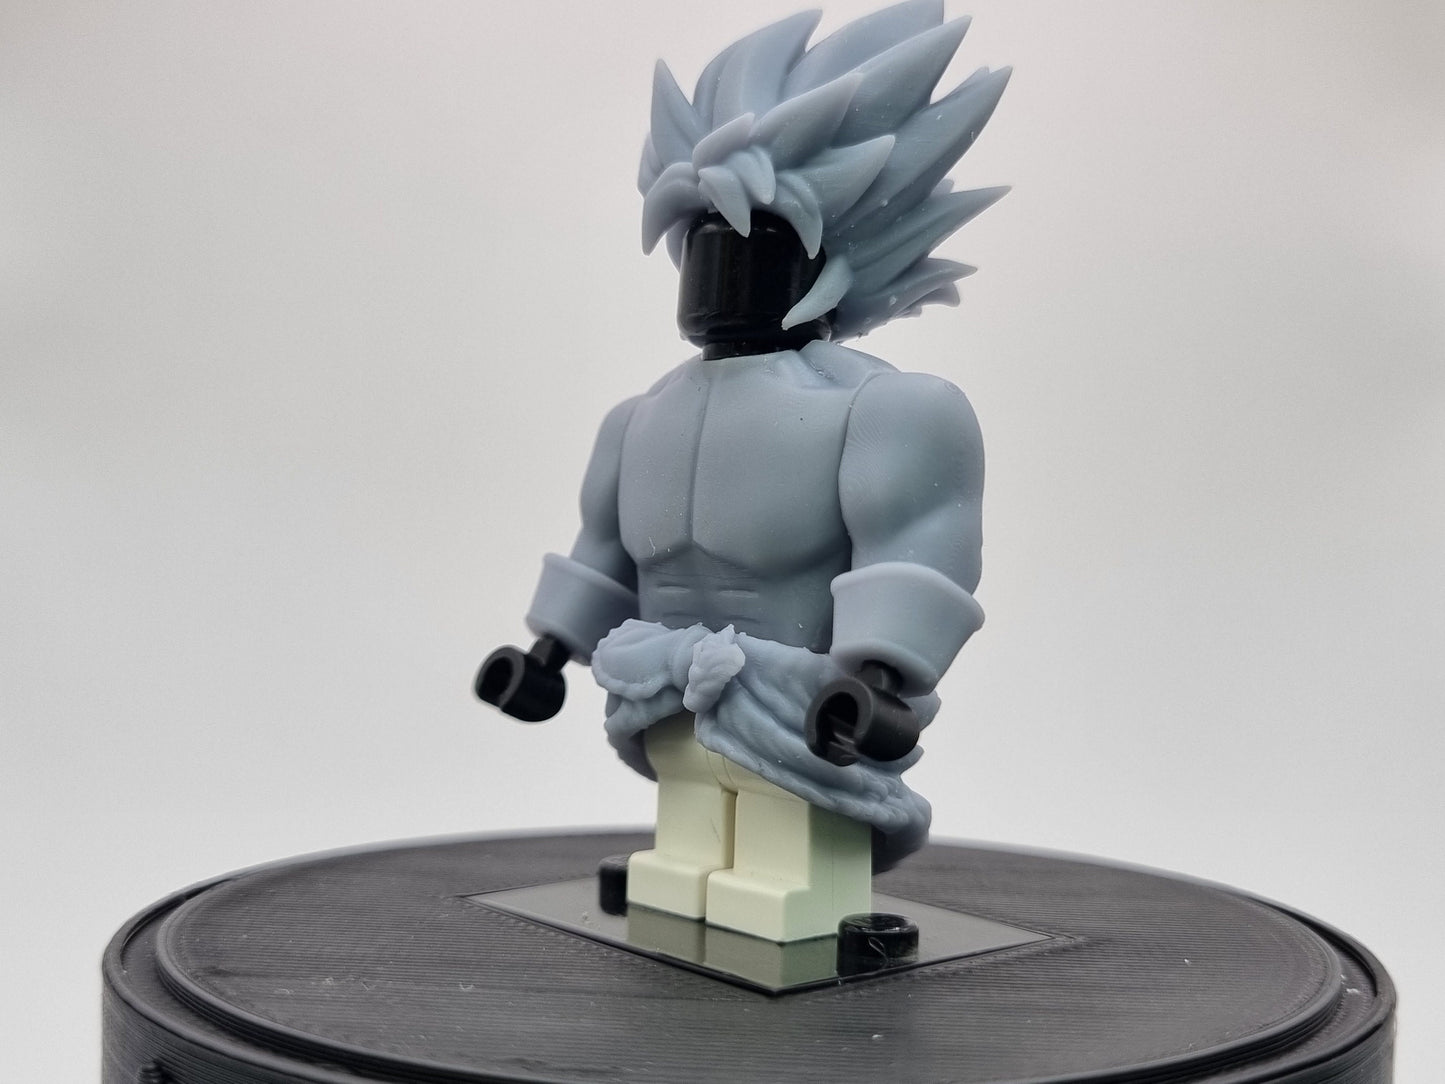 Building toy buffed guy with spikey hair!